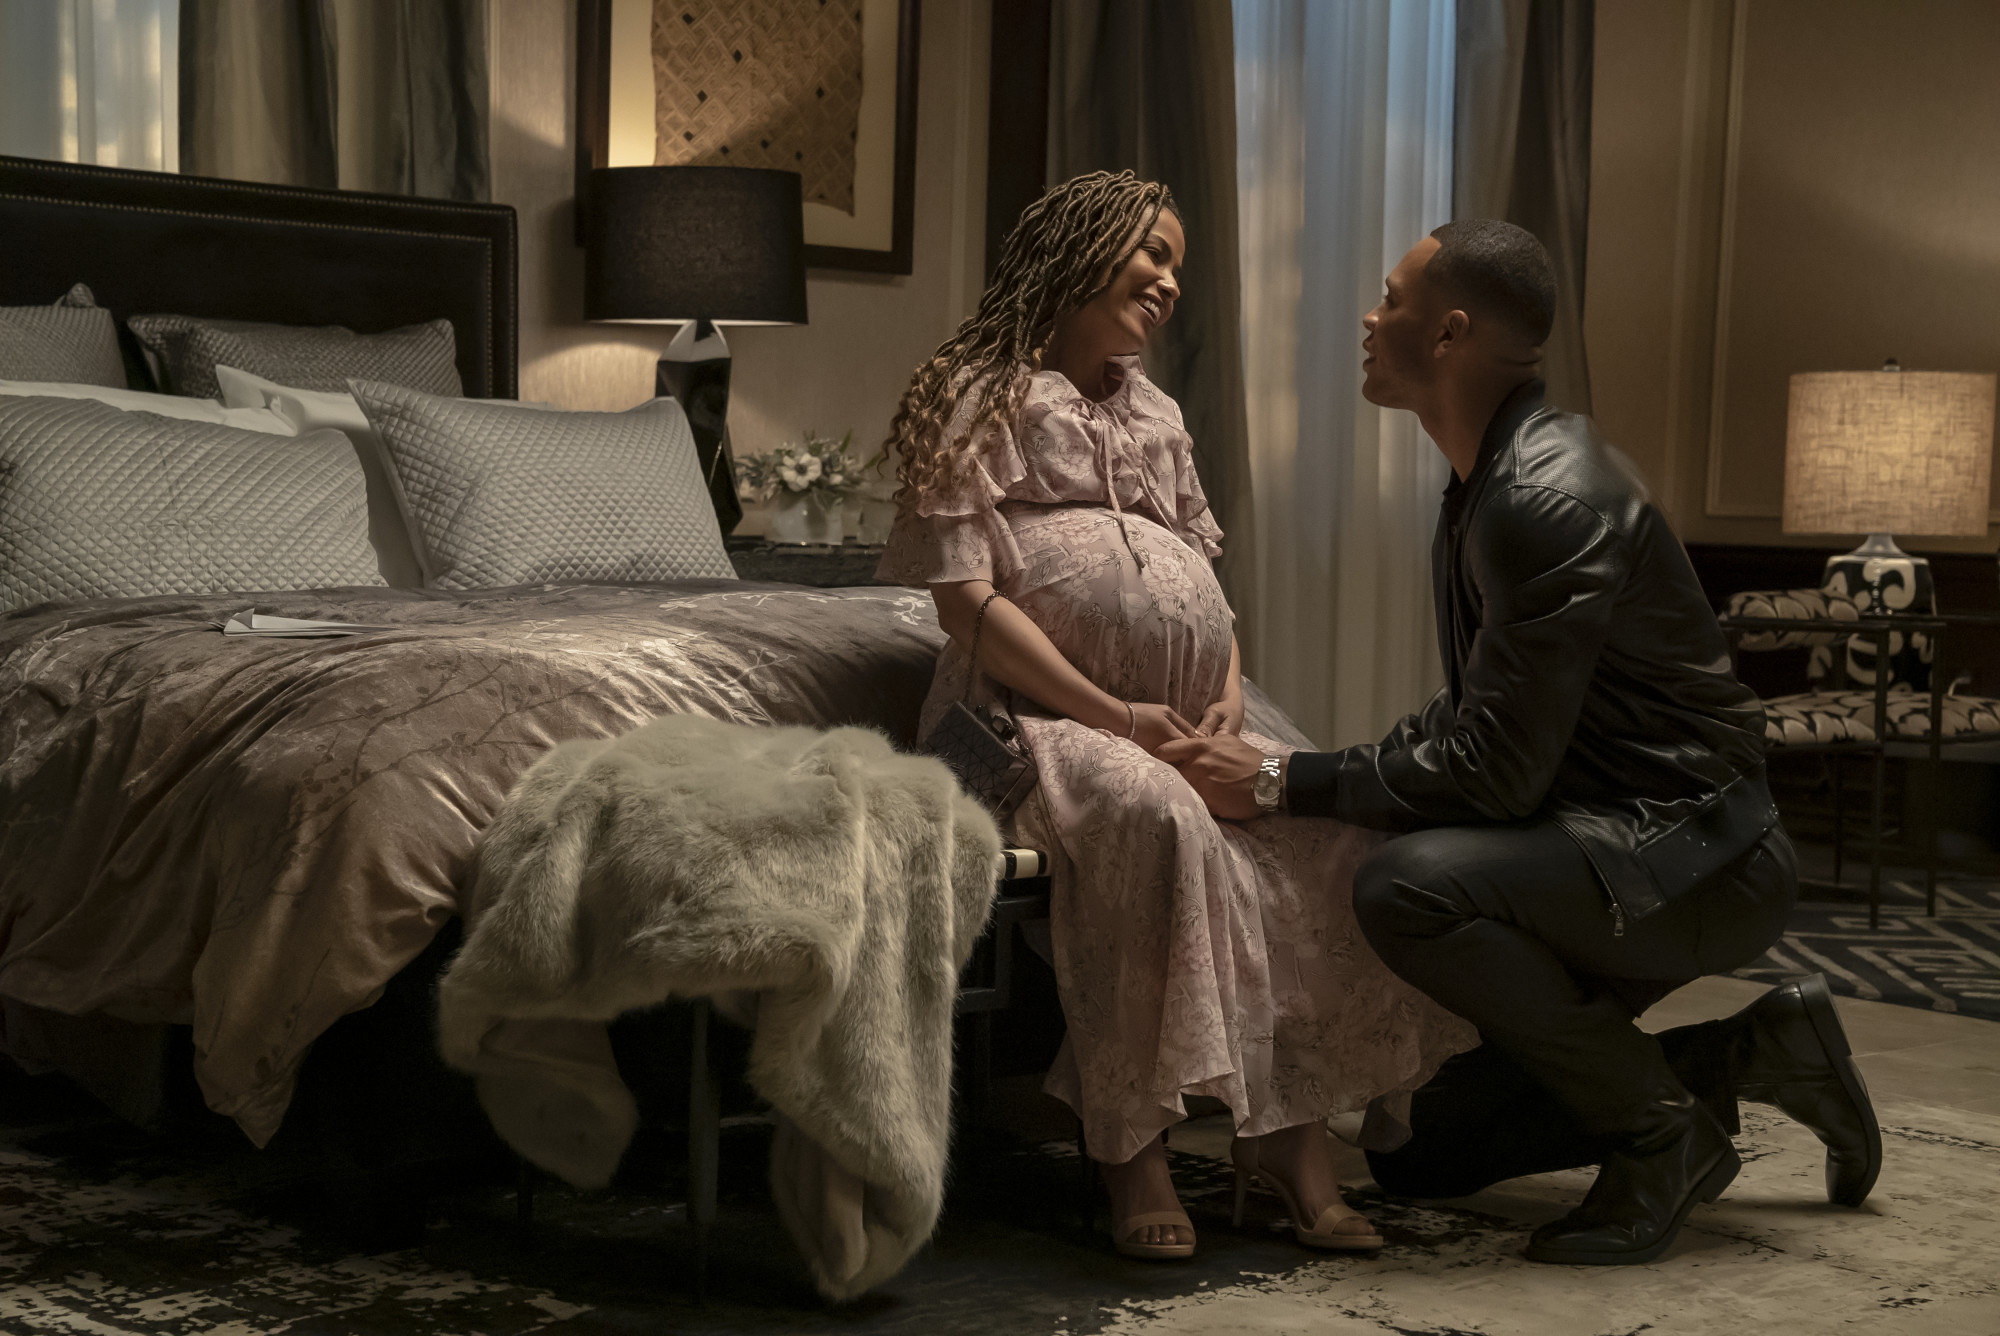 EMPIRE: L-R: Meta Golding and Trai Byers in the "What Is Love" season premiere episode of EMPIRE airing Tuesday, Sept. 24 (9:00-10:00 PM ET/PT) on FOX. ©2019 Fox Broadcasting Co. All Rights Reserved. CR: Chuck Hodes/FOX.